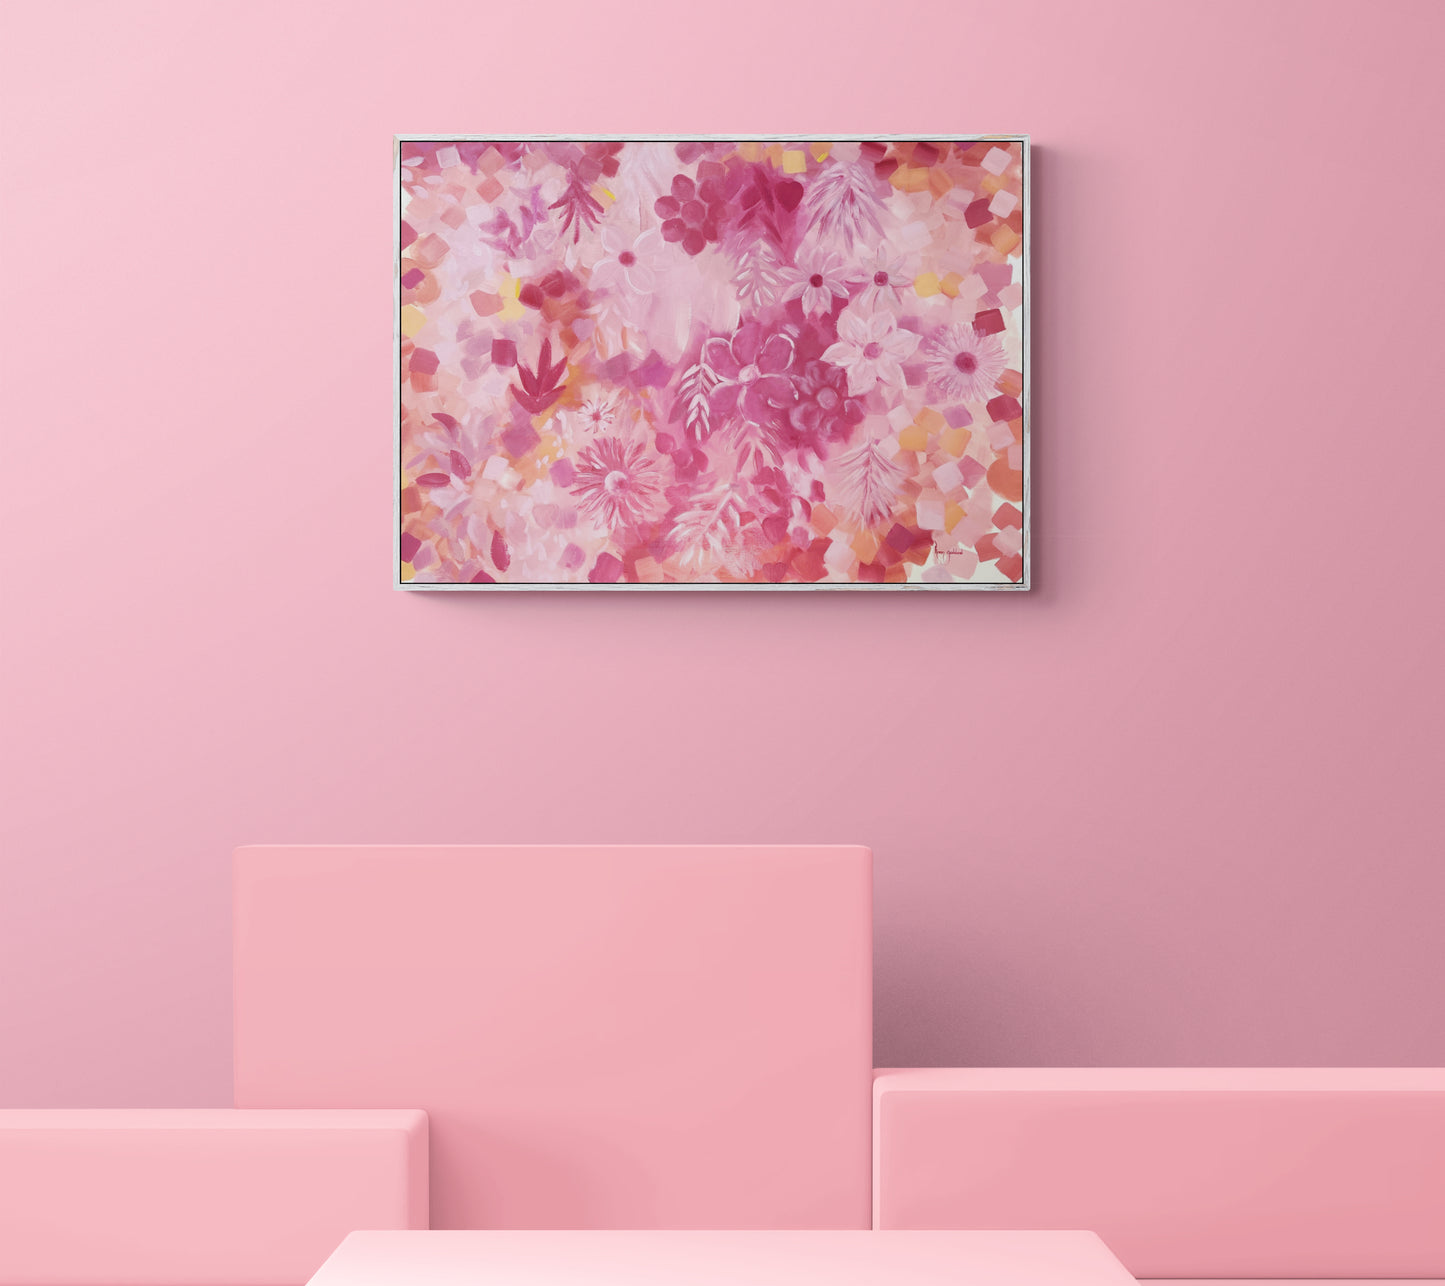 Flourishing in pink - Limited edition print